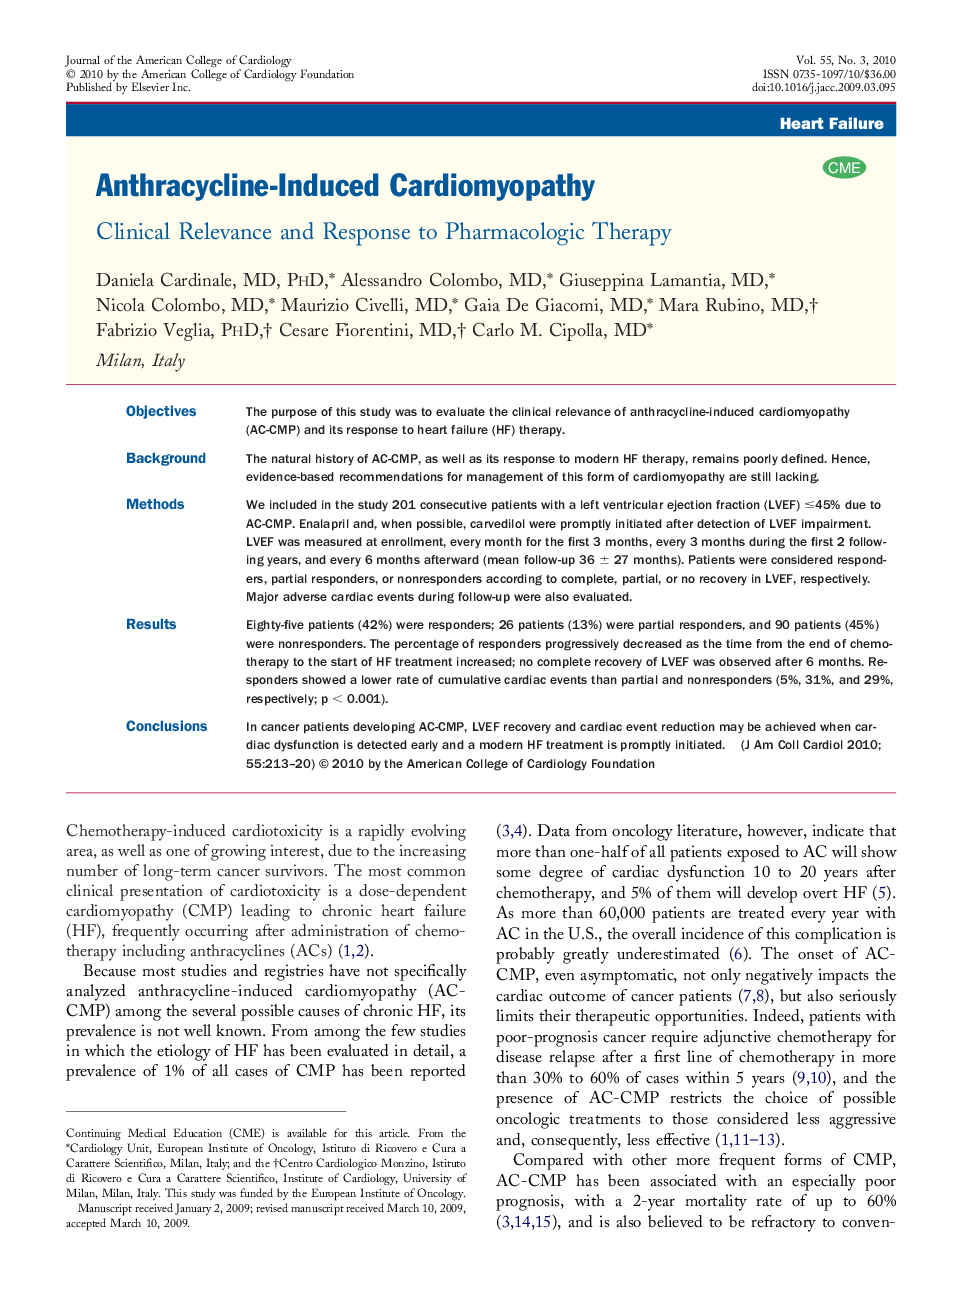 Anthracycline-Induced Cardiomyopathy : Clinical Relevance and Response to Pharmacologic Therapy